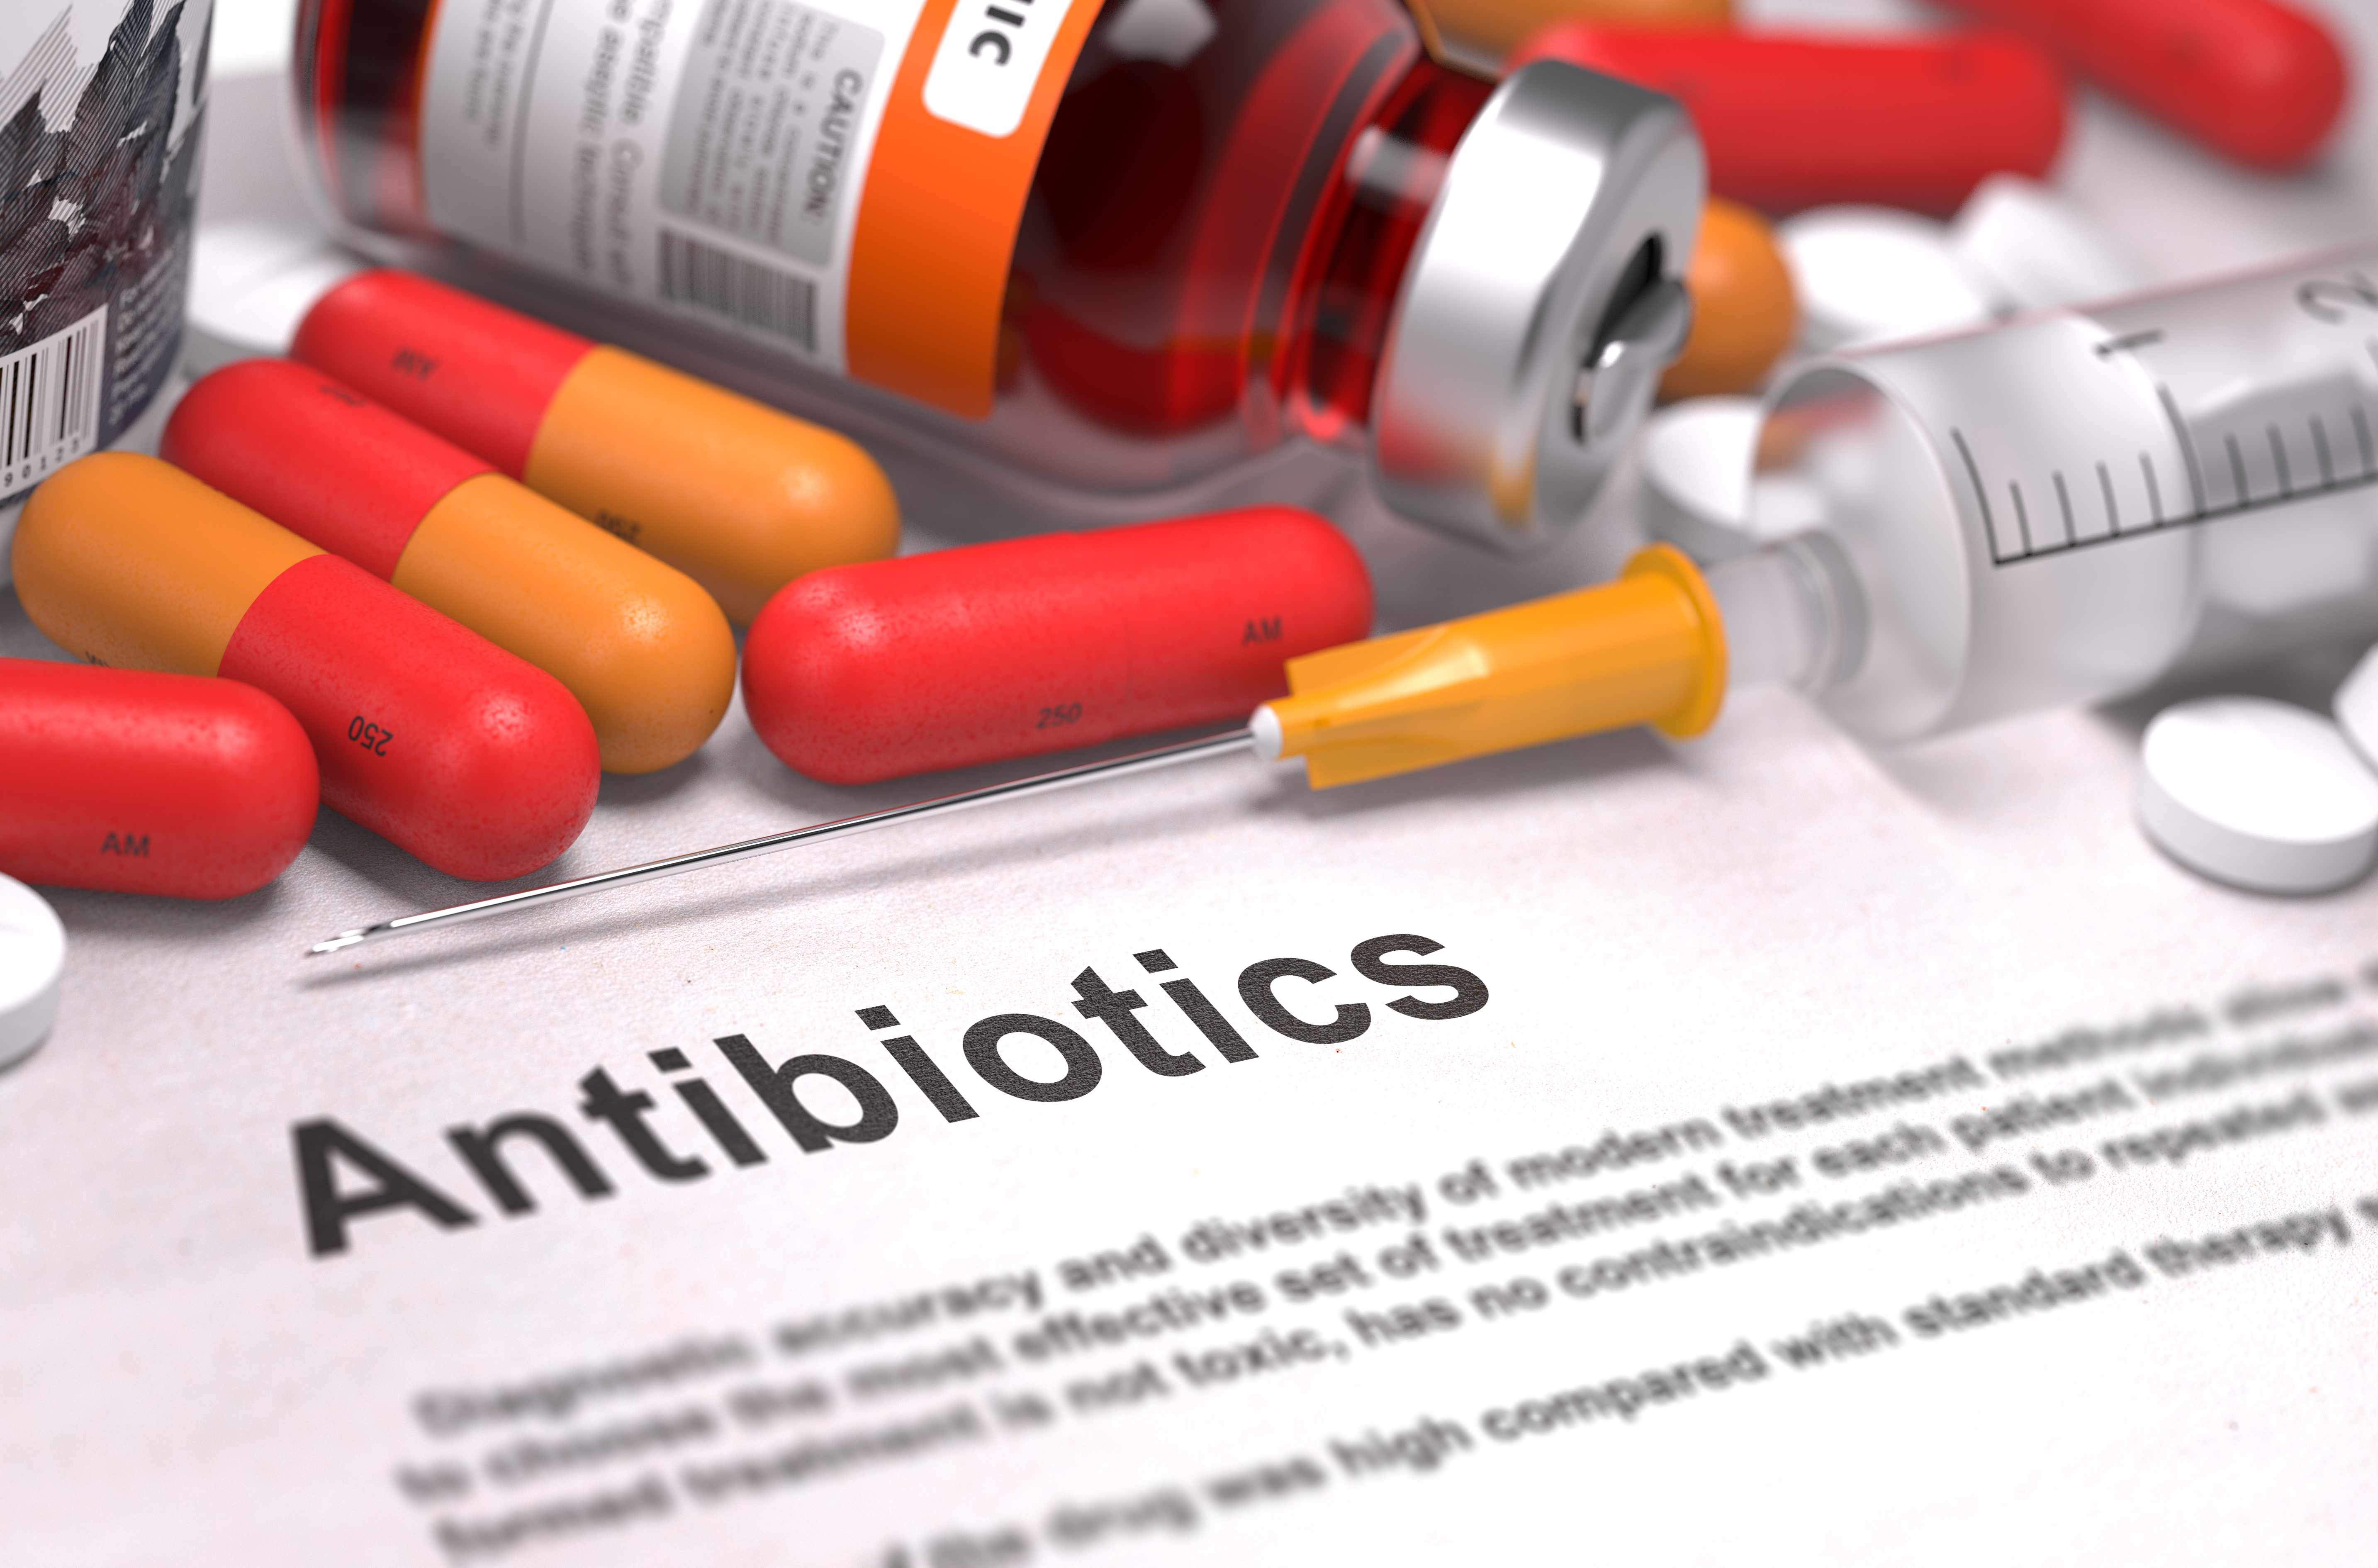 pills, medicine, antibiotic, syringe with the the word antibiotic on a piece of paper